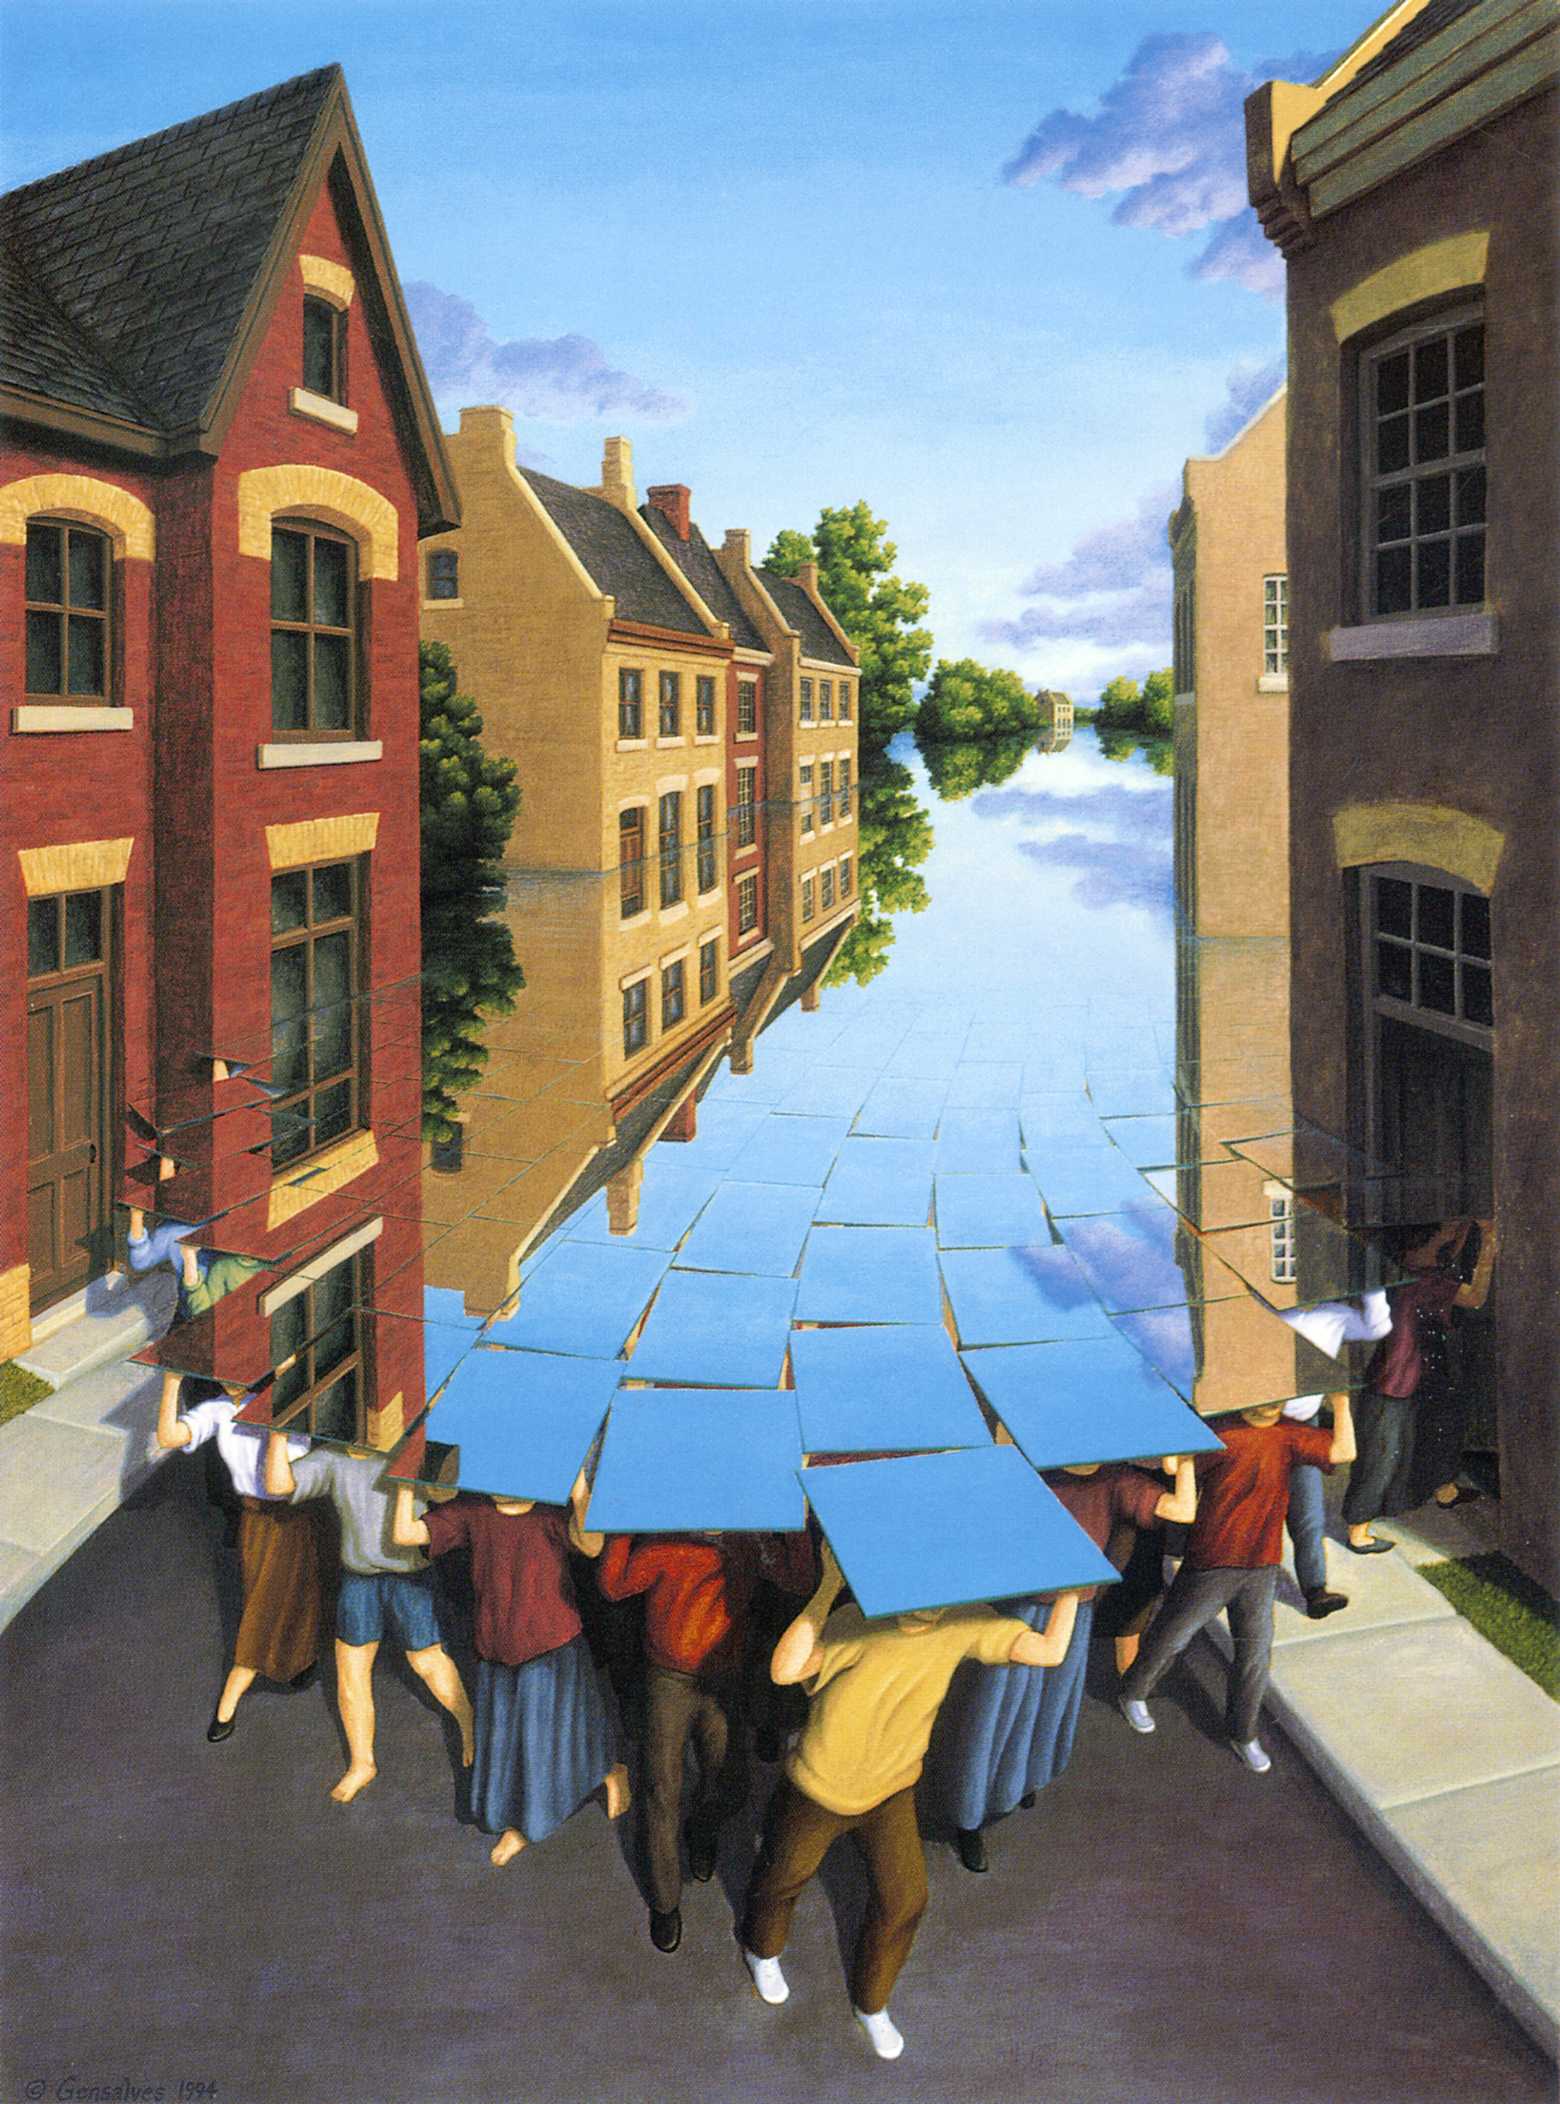 paintings of Rob Gonsalves